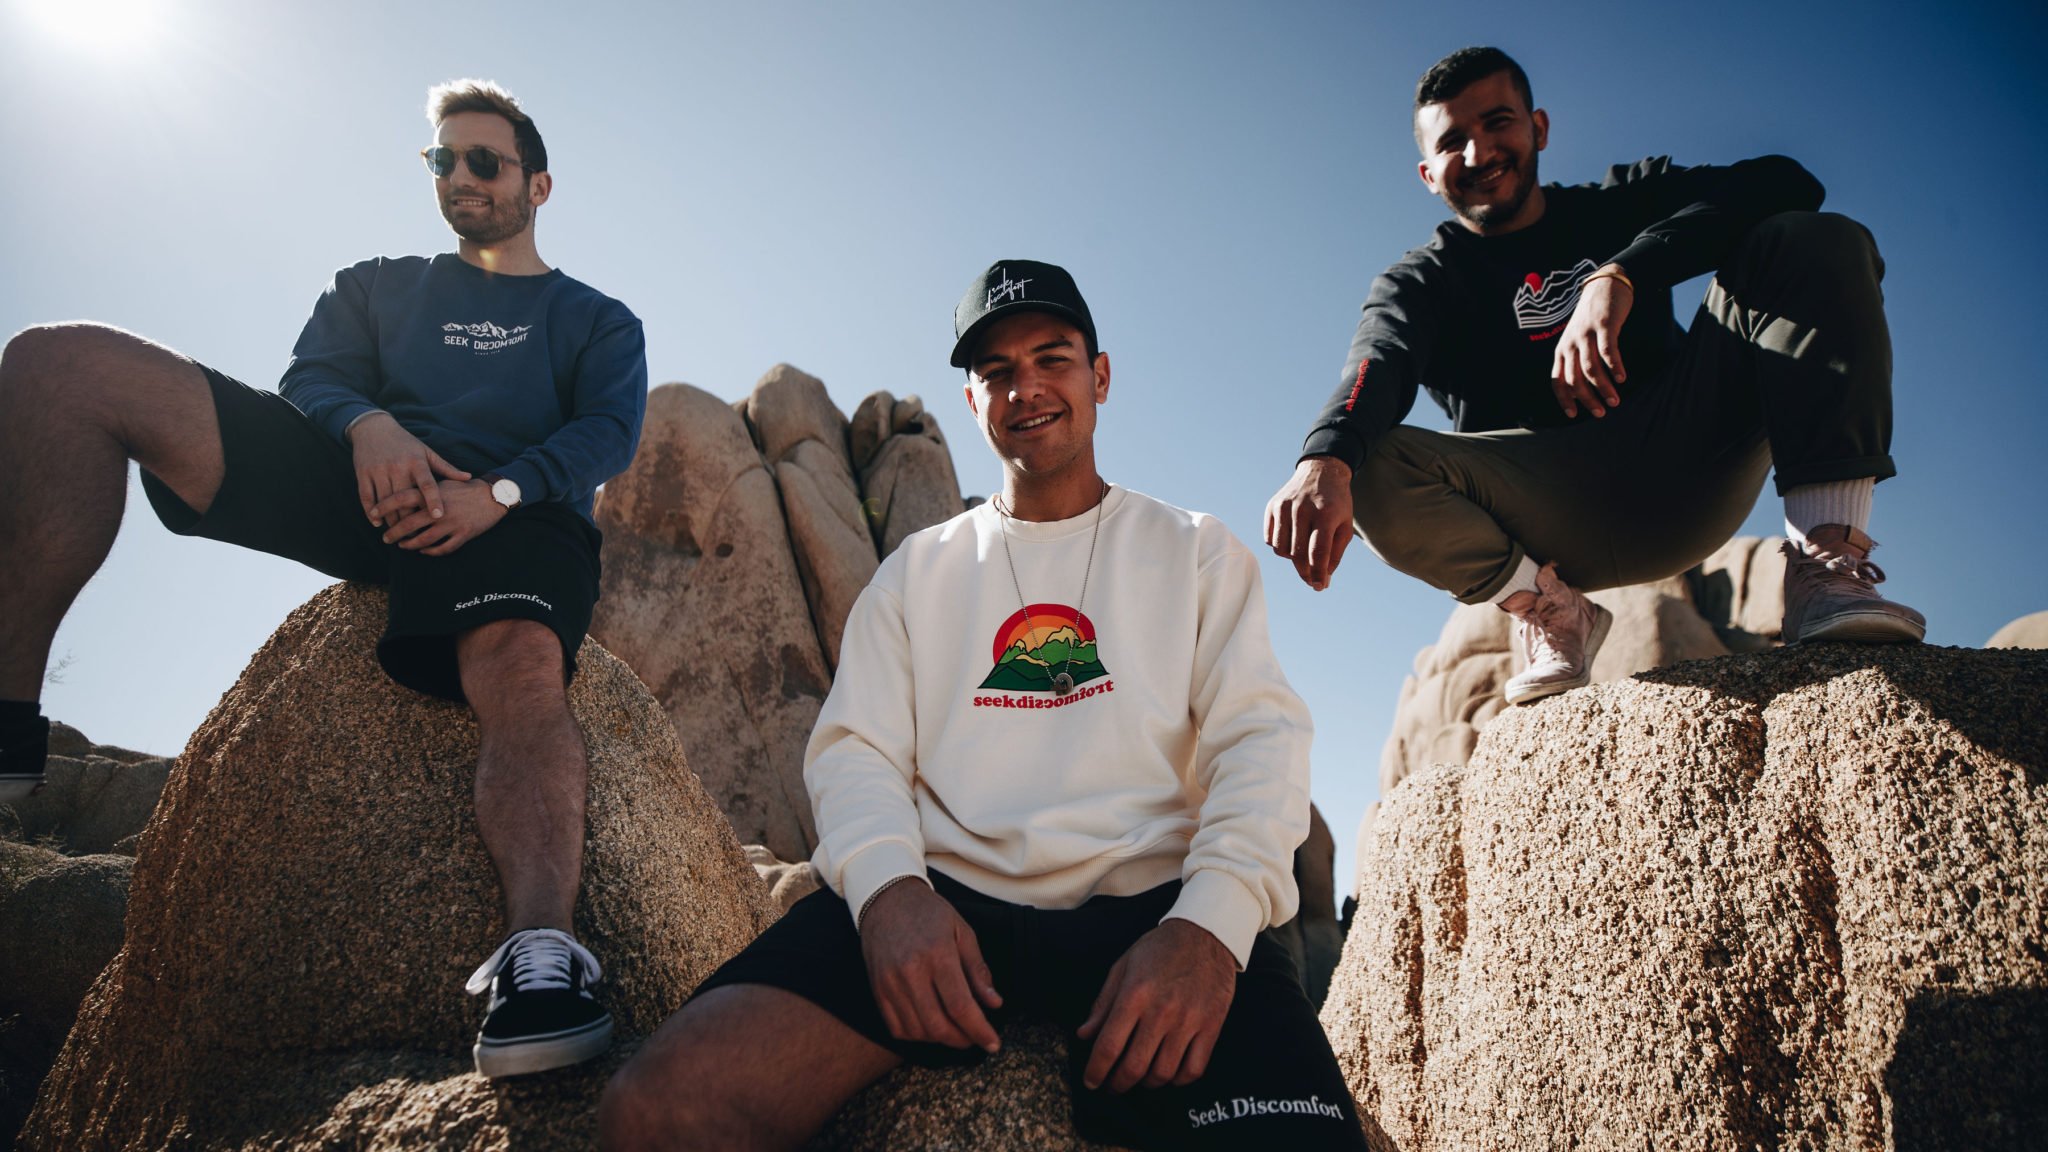 The Yes Theory digital media company recruited ecommerce and fashion veteran Bryan Spunt (center) to run Seek Discomfort shortly after they launched it in 2018. Yes Theory co-founders Matt Dajer and Ammar Kandil are at left and right, respectively. Photo courtesy Seek Discomfort